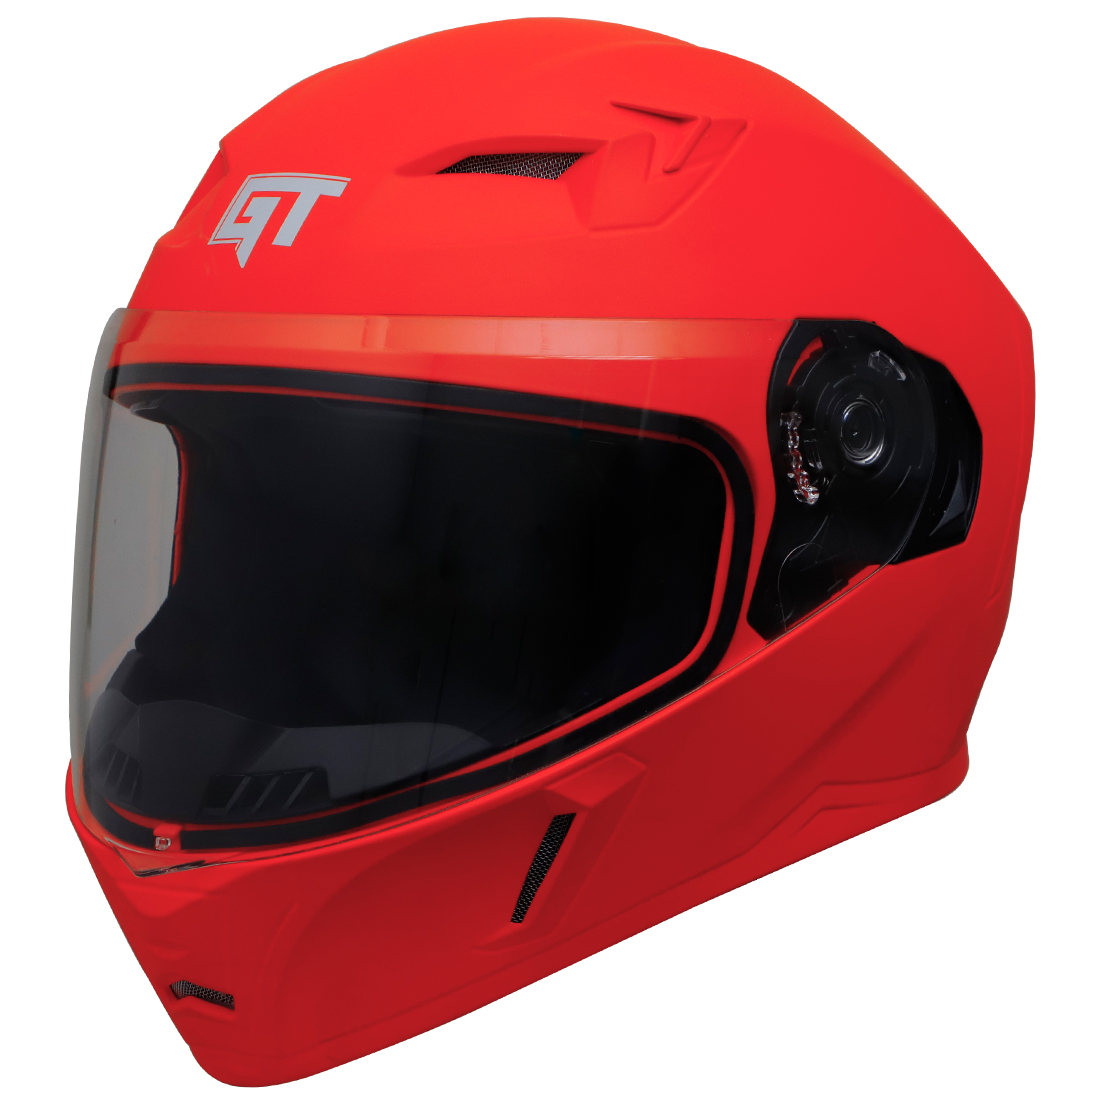 Steelbird SBA-21 GT Full Face ISI Certified Helmet (Dashing Red with Clear Visor)